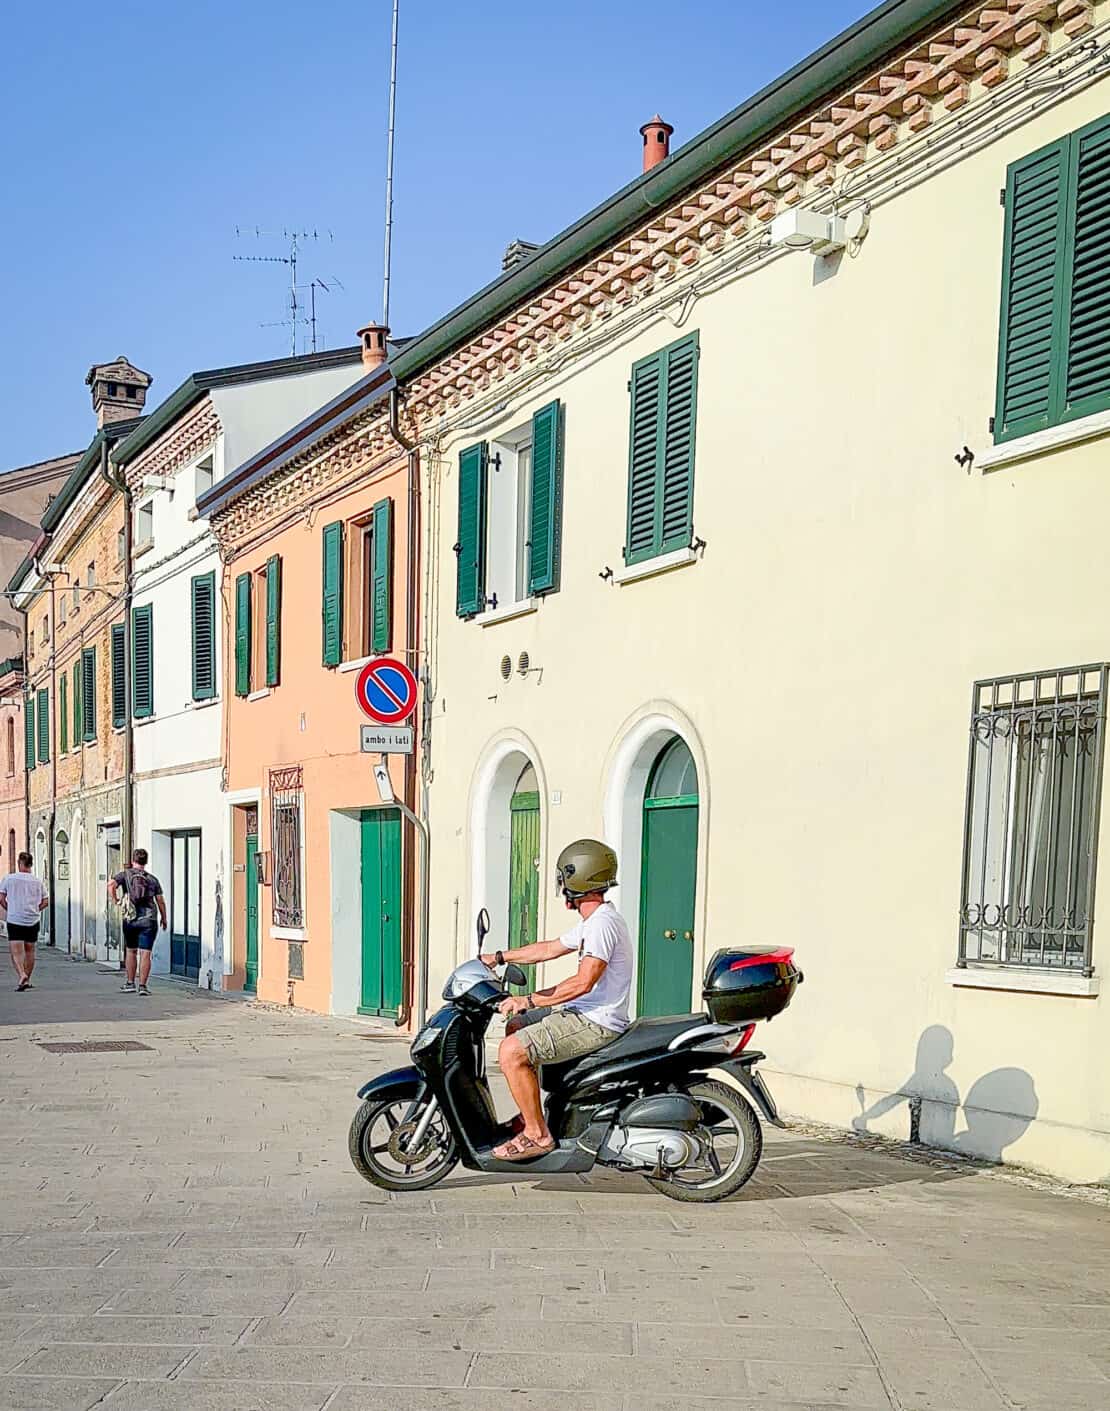 Street scene of Comacchio Italy with a man on a motorbike